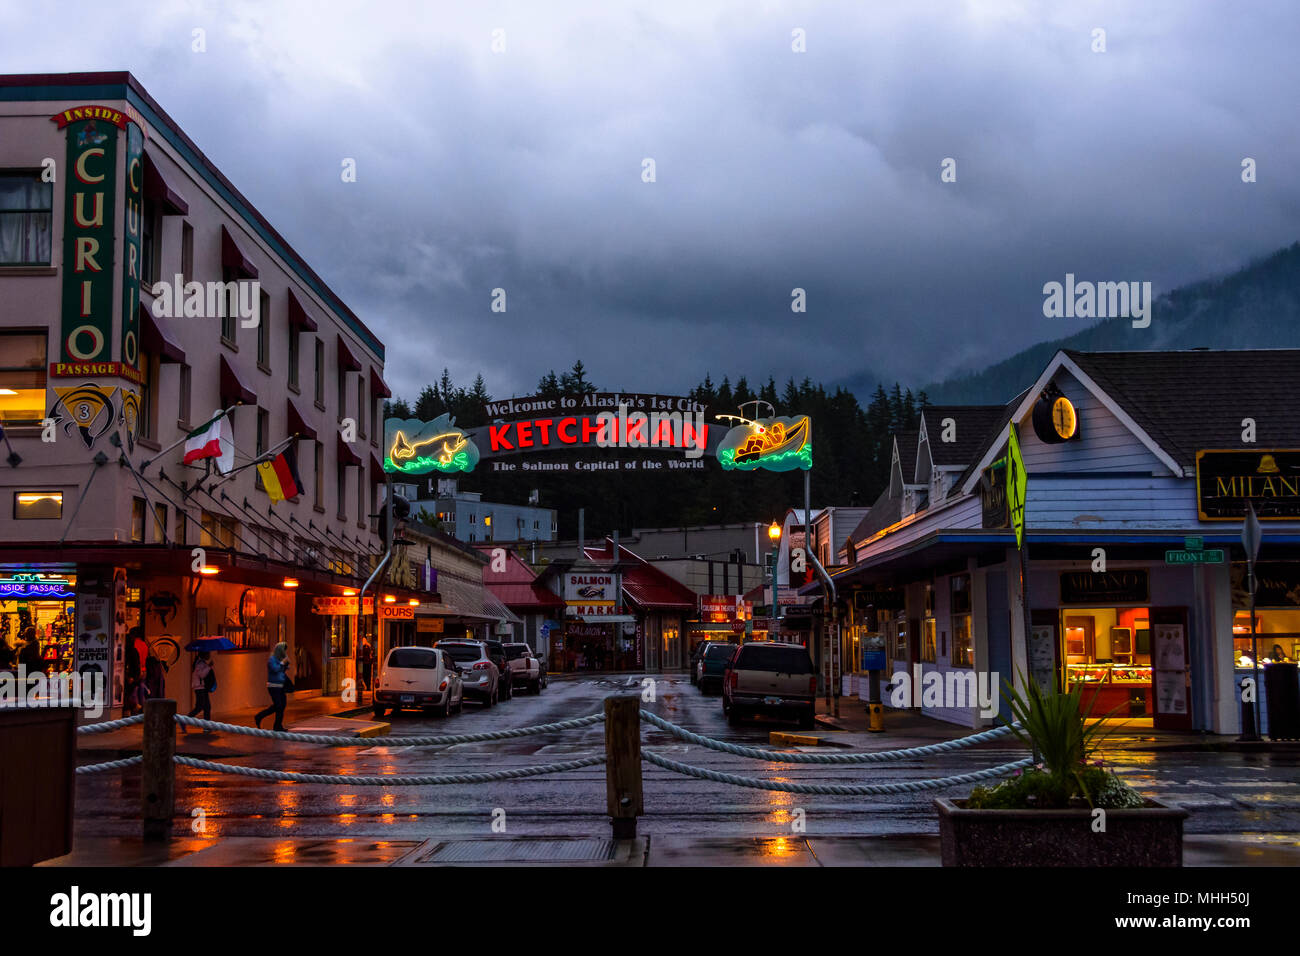 Ketchikan town in Alaska. Old wooden houses and shops at night. Stock Photo